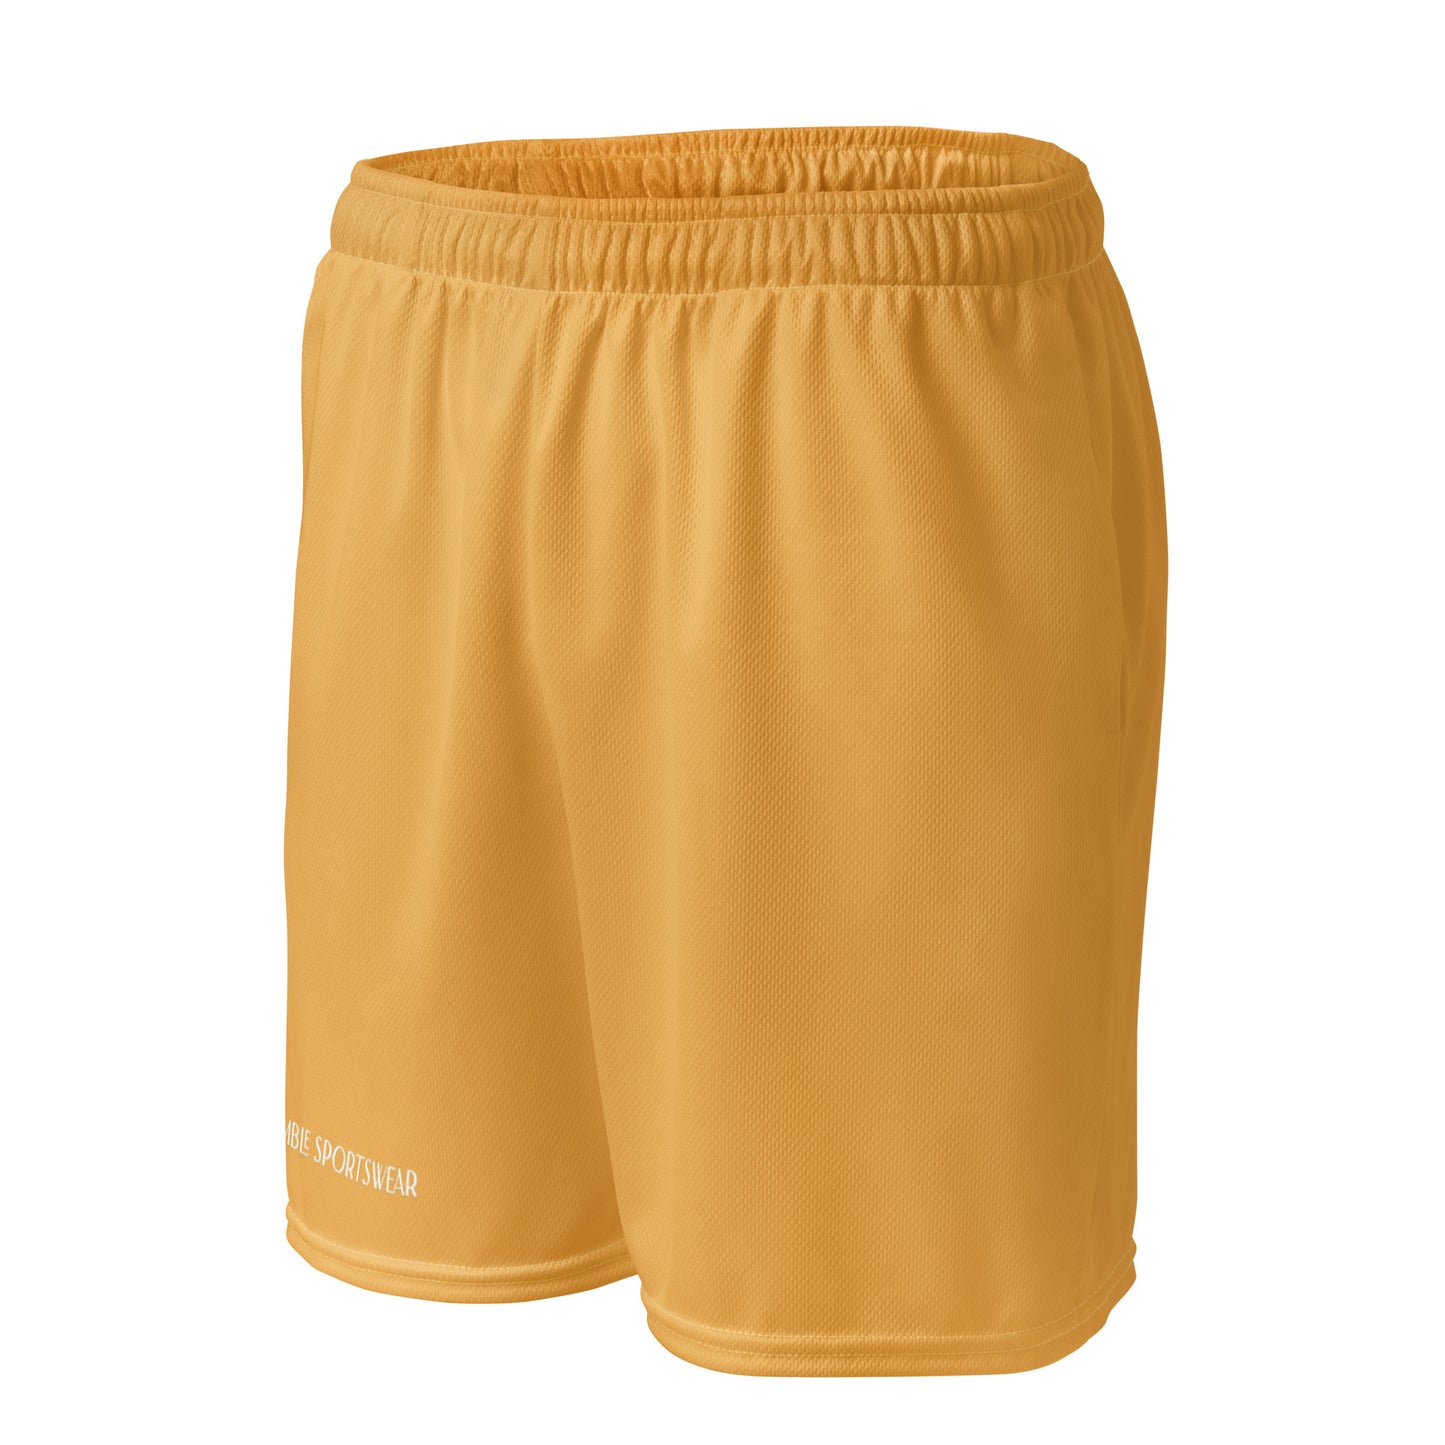 Humble Sportswear, men's color match activewear basketball shorts, gold 